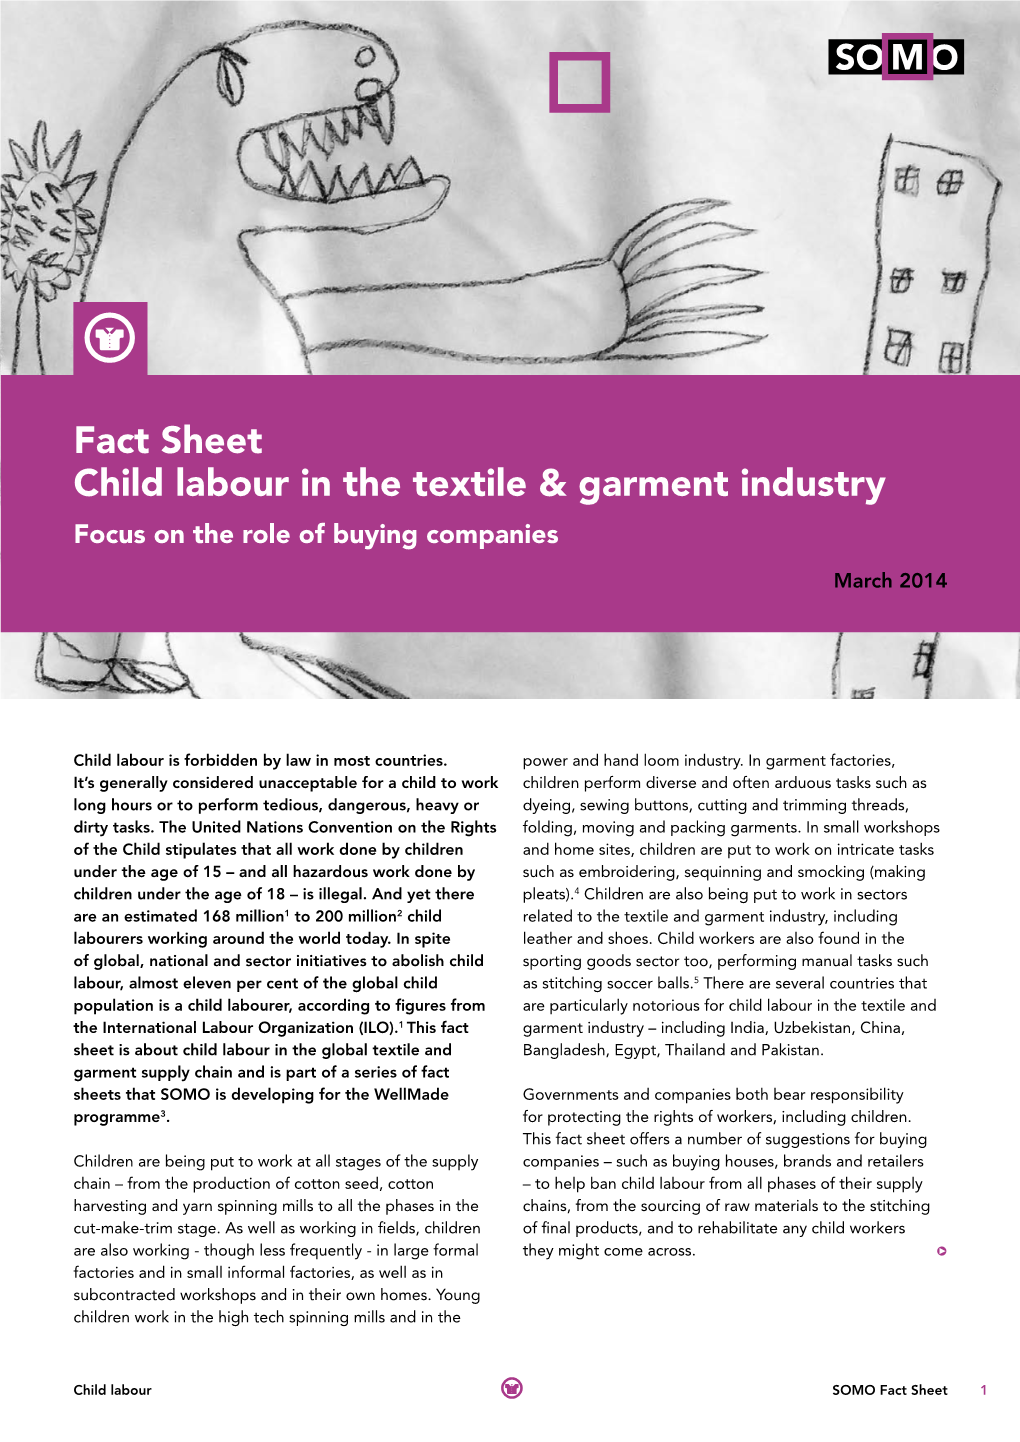 Fact Sheet Child Labour in the Textile & Garment Industry